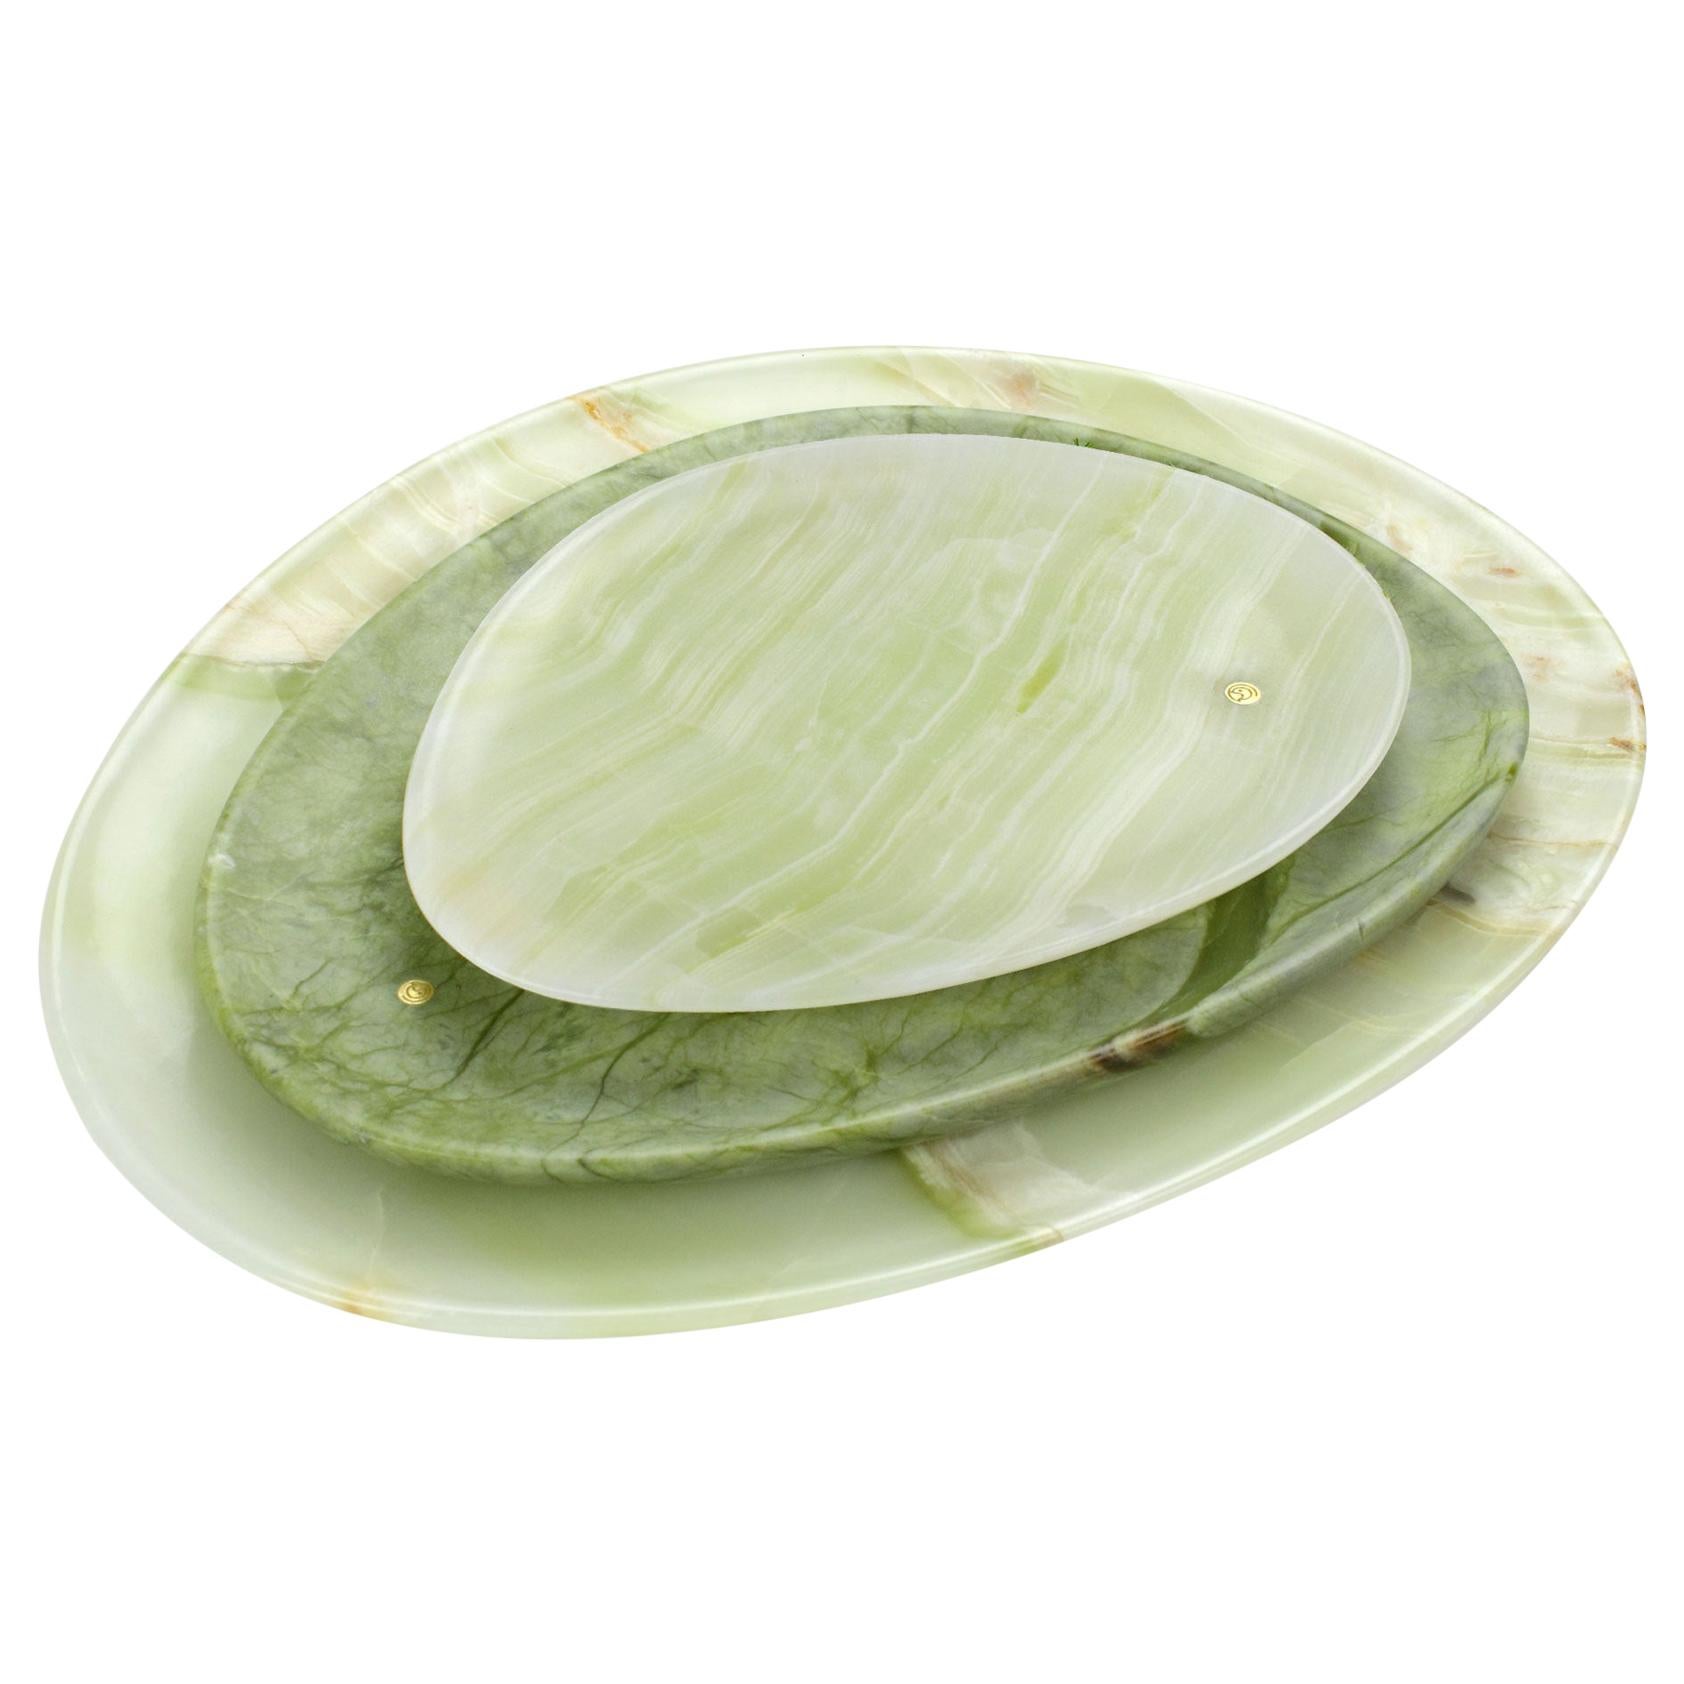 Plates Platters Serveware Set Solid Green Onyx Ming Marble Hand-carved Italy